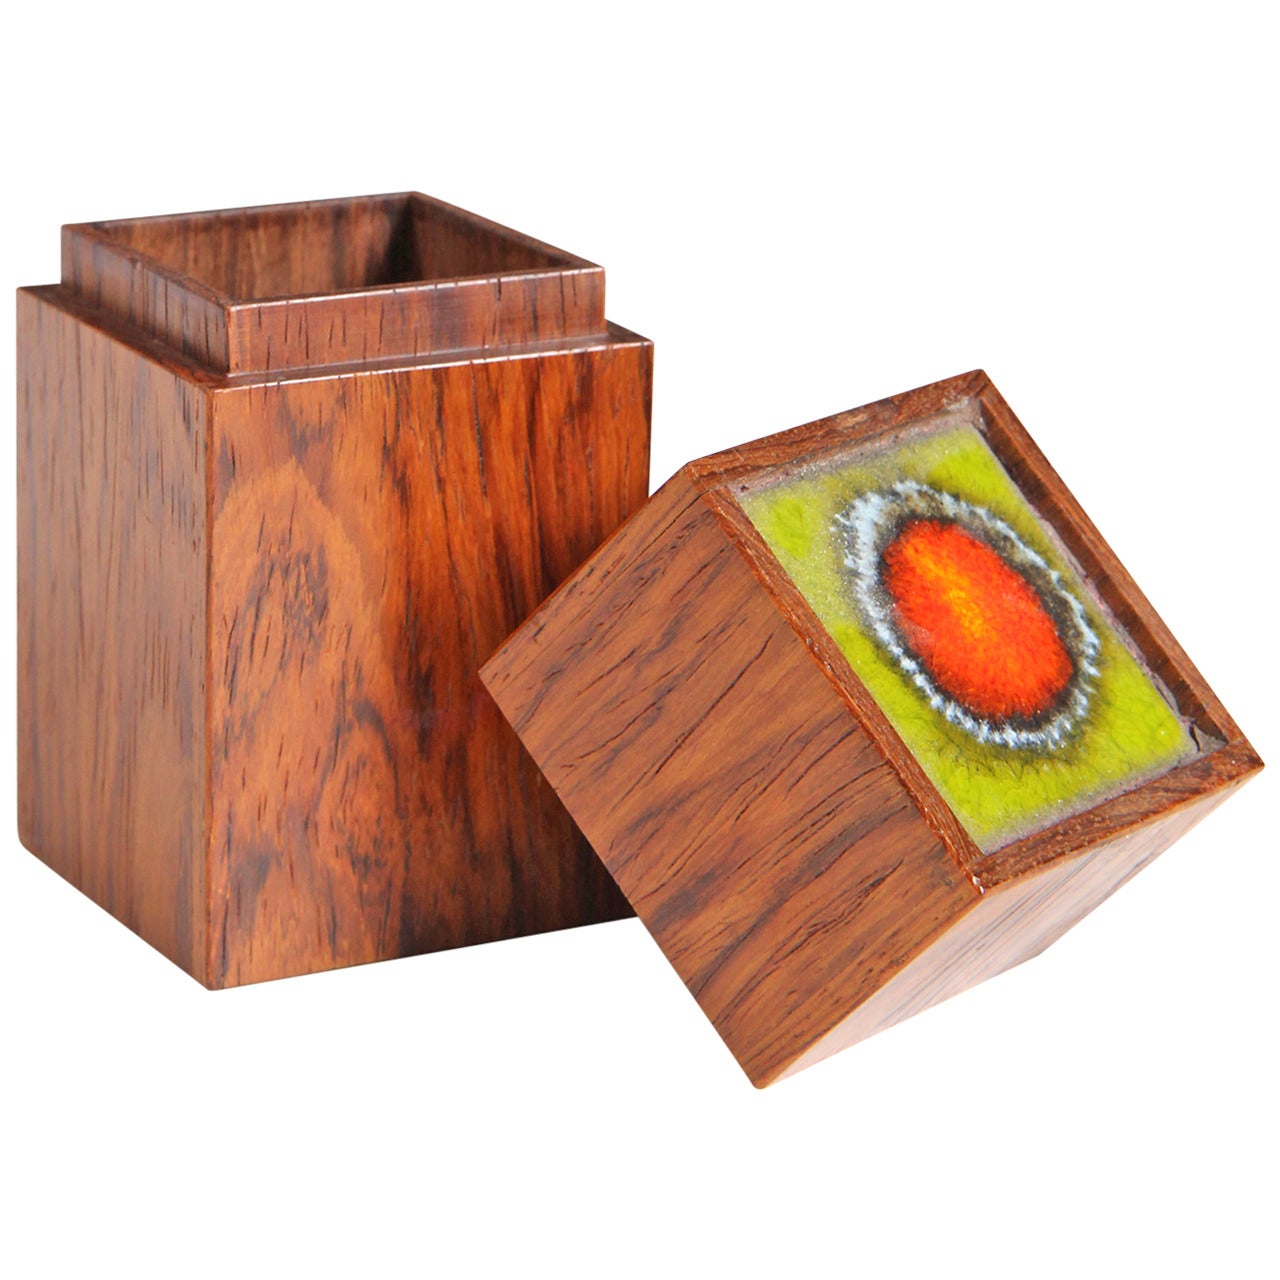 Bodil Eje Rosewood Trinket Box with Inlaid Ceramic Tile For Sale